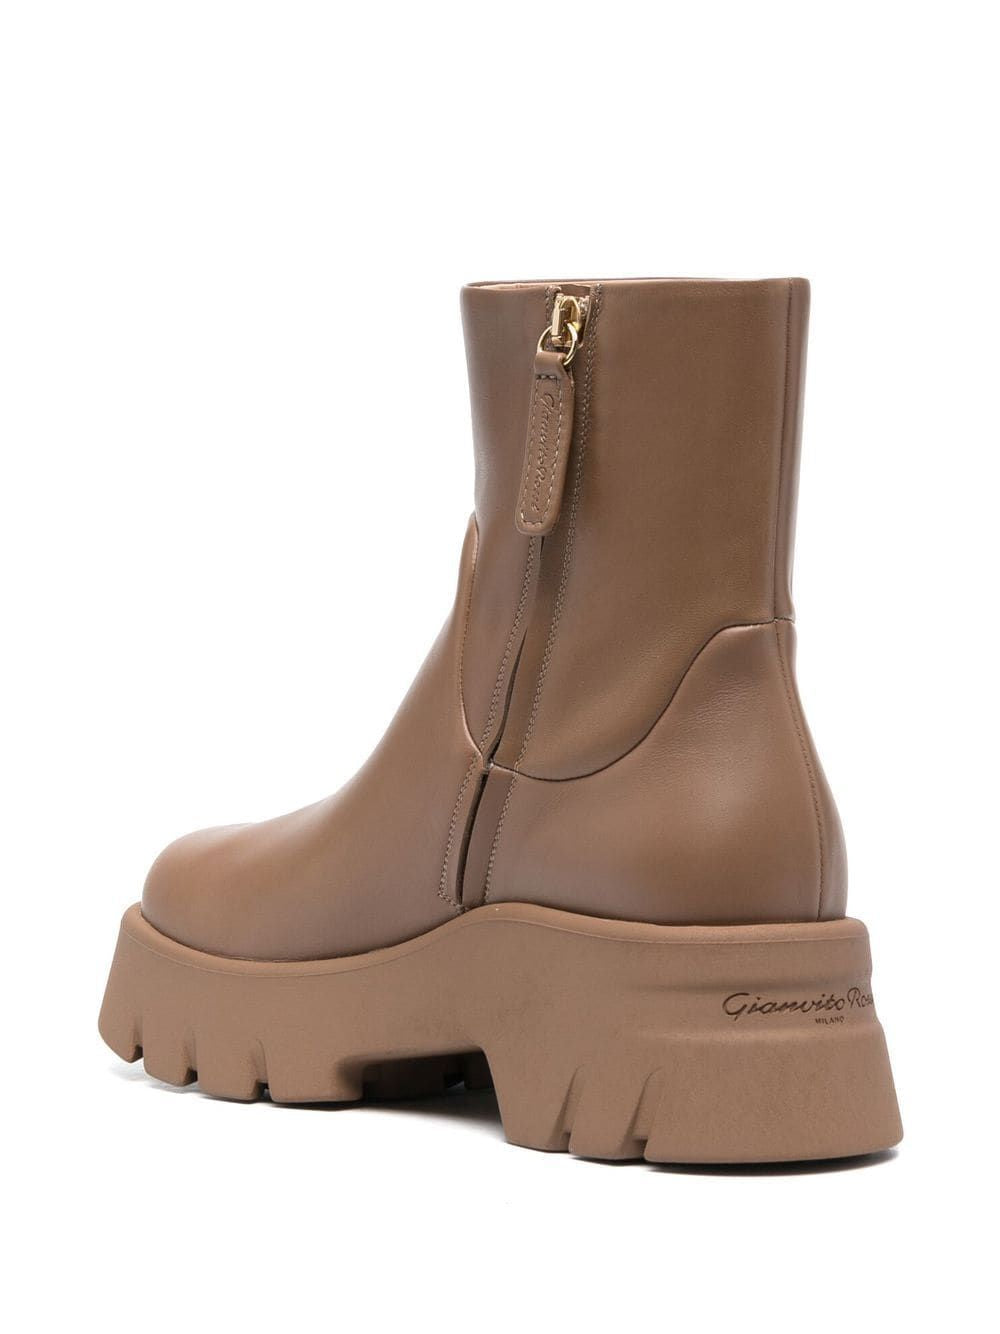 GIANVITO ROSSI Classic Camel Boots for Women